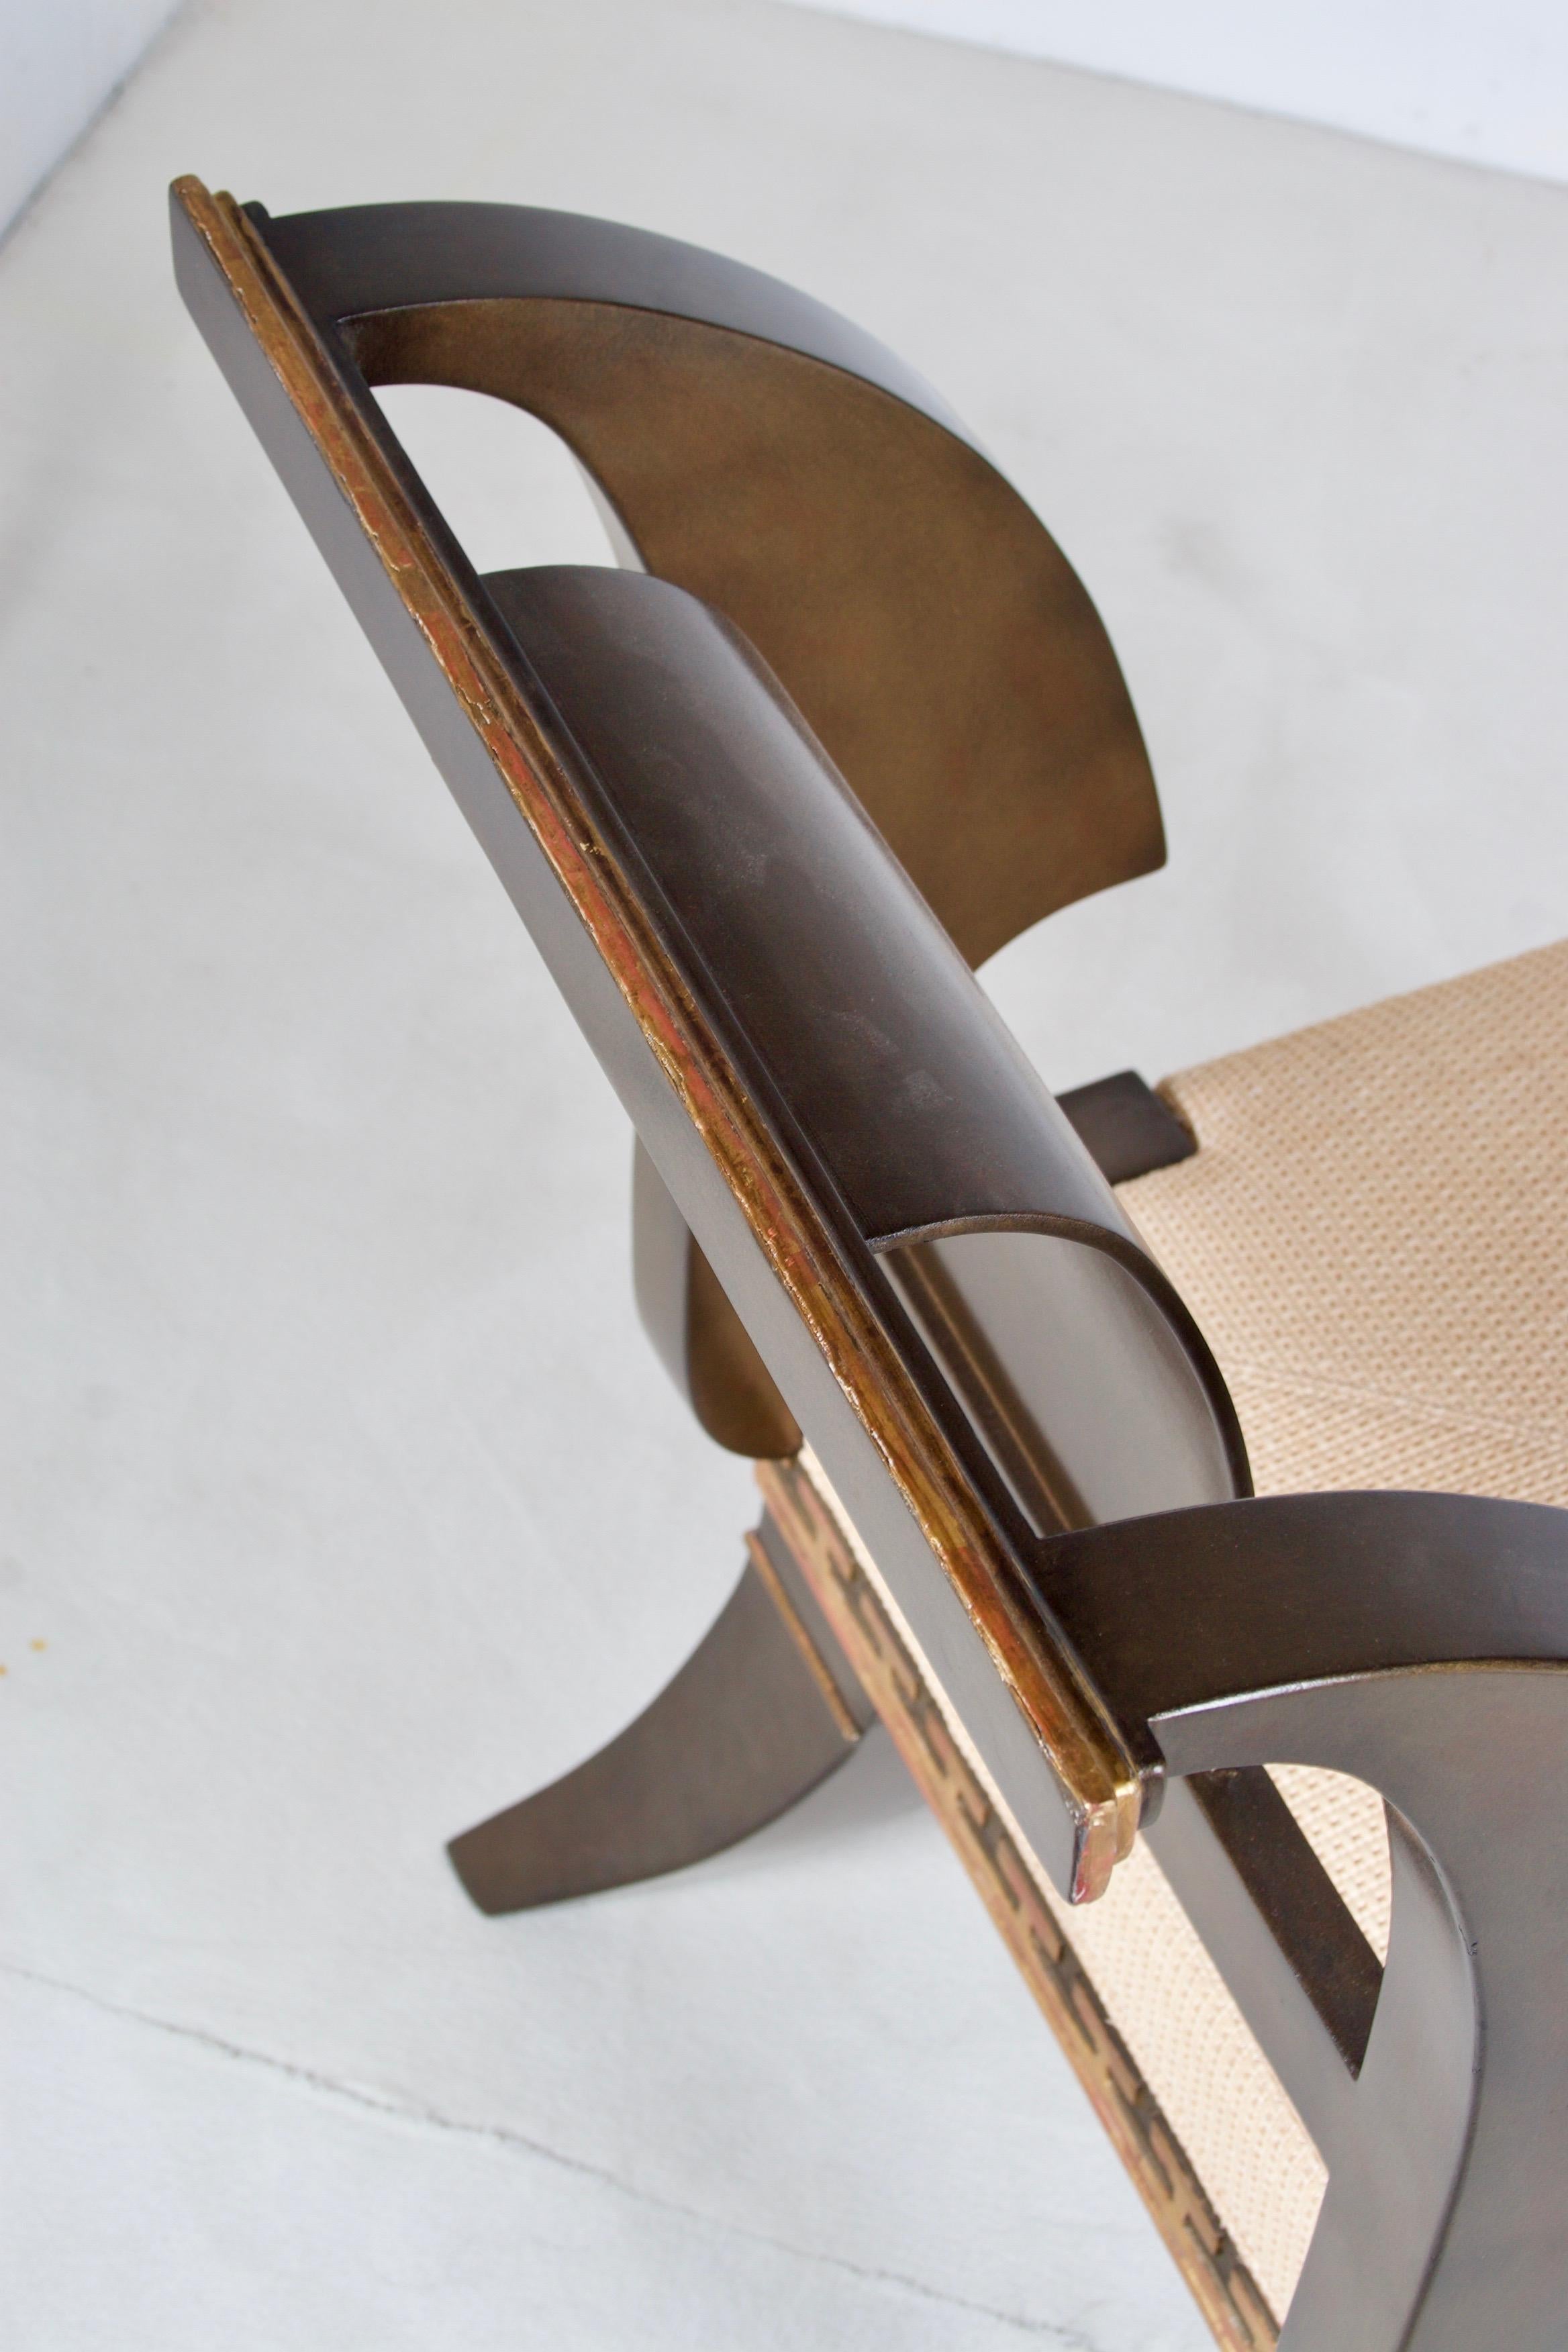 Modern Sabre Leg Chairs in  Engl. Neoclassic style, after a Model by Thomas Hope In Good Condition For Sale In San Francisco, CA